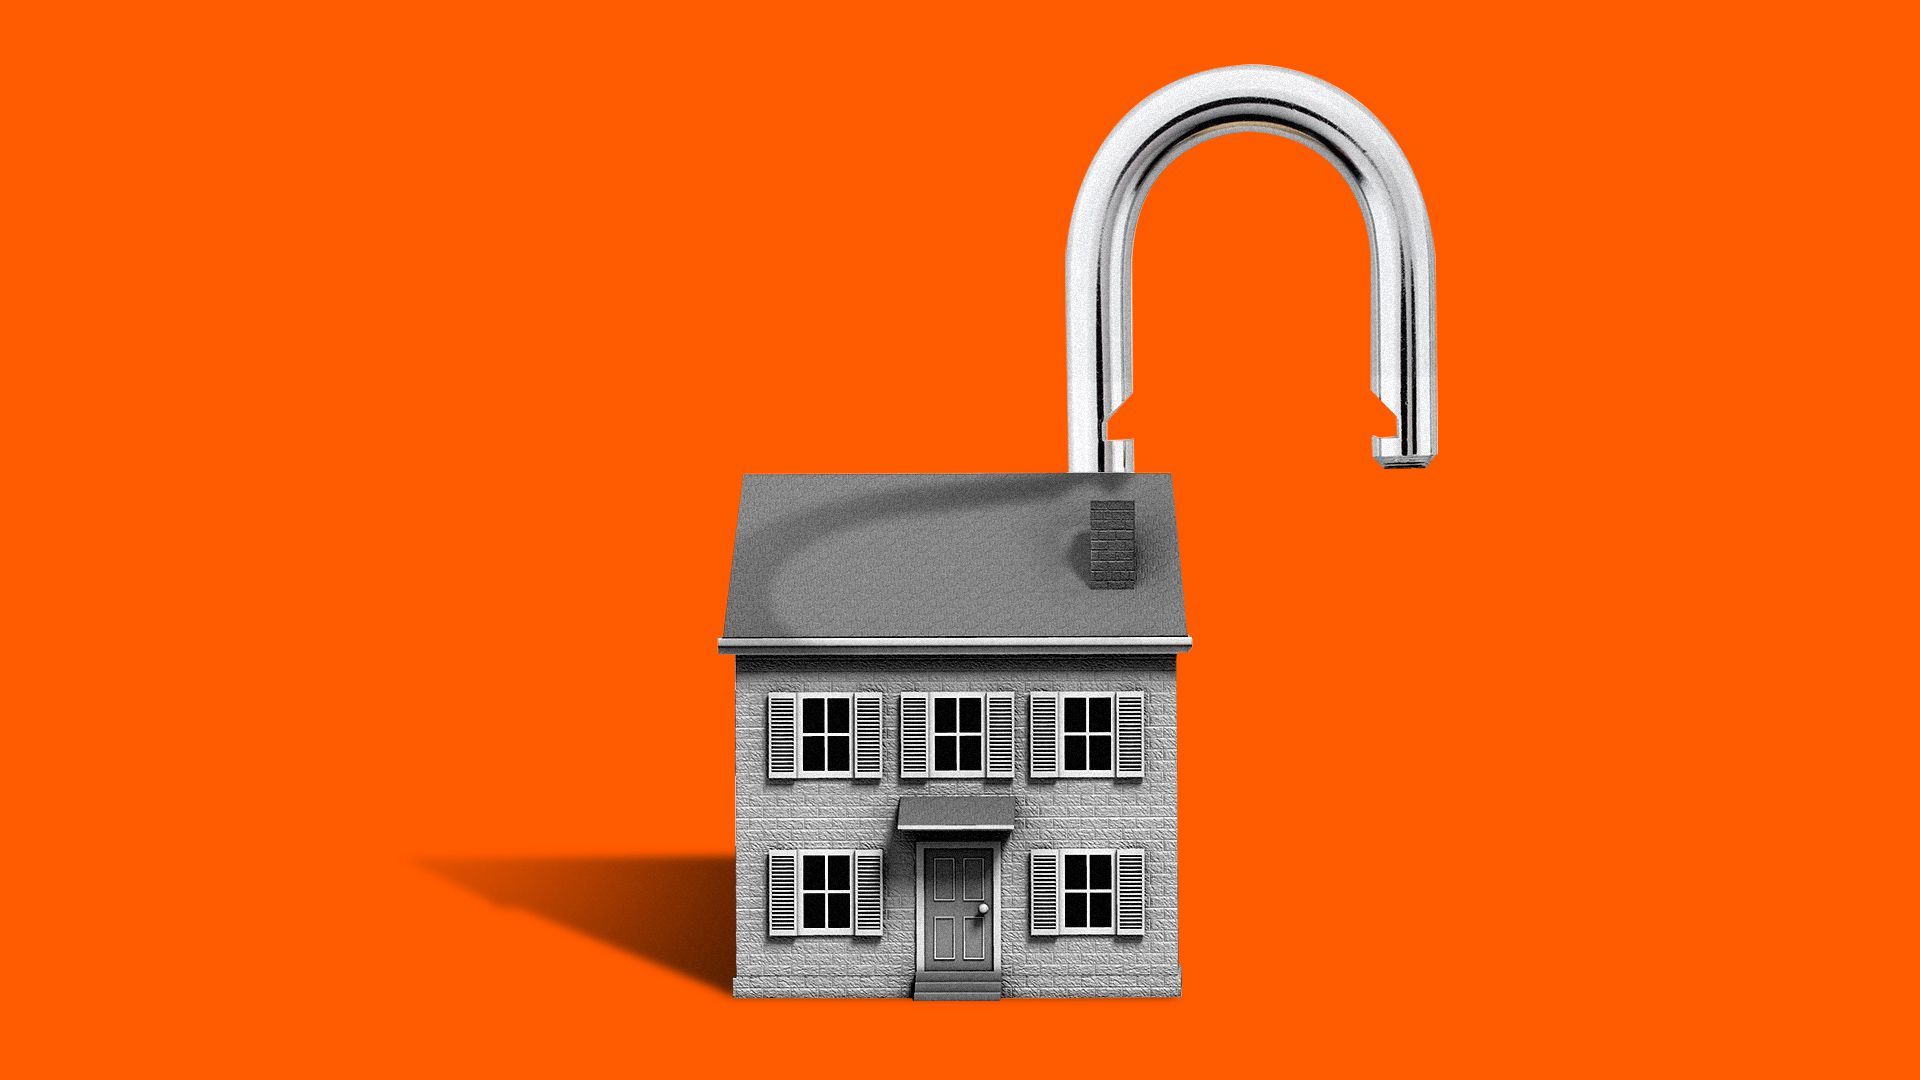 Illustration of a house with a padlock shackle on the roof in an open position.